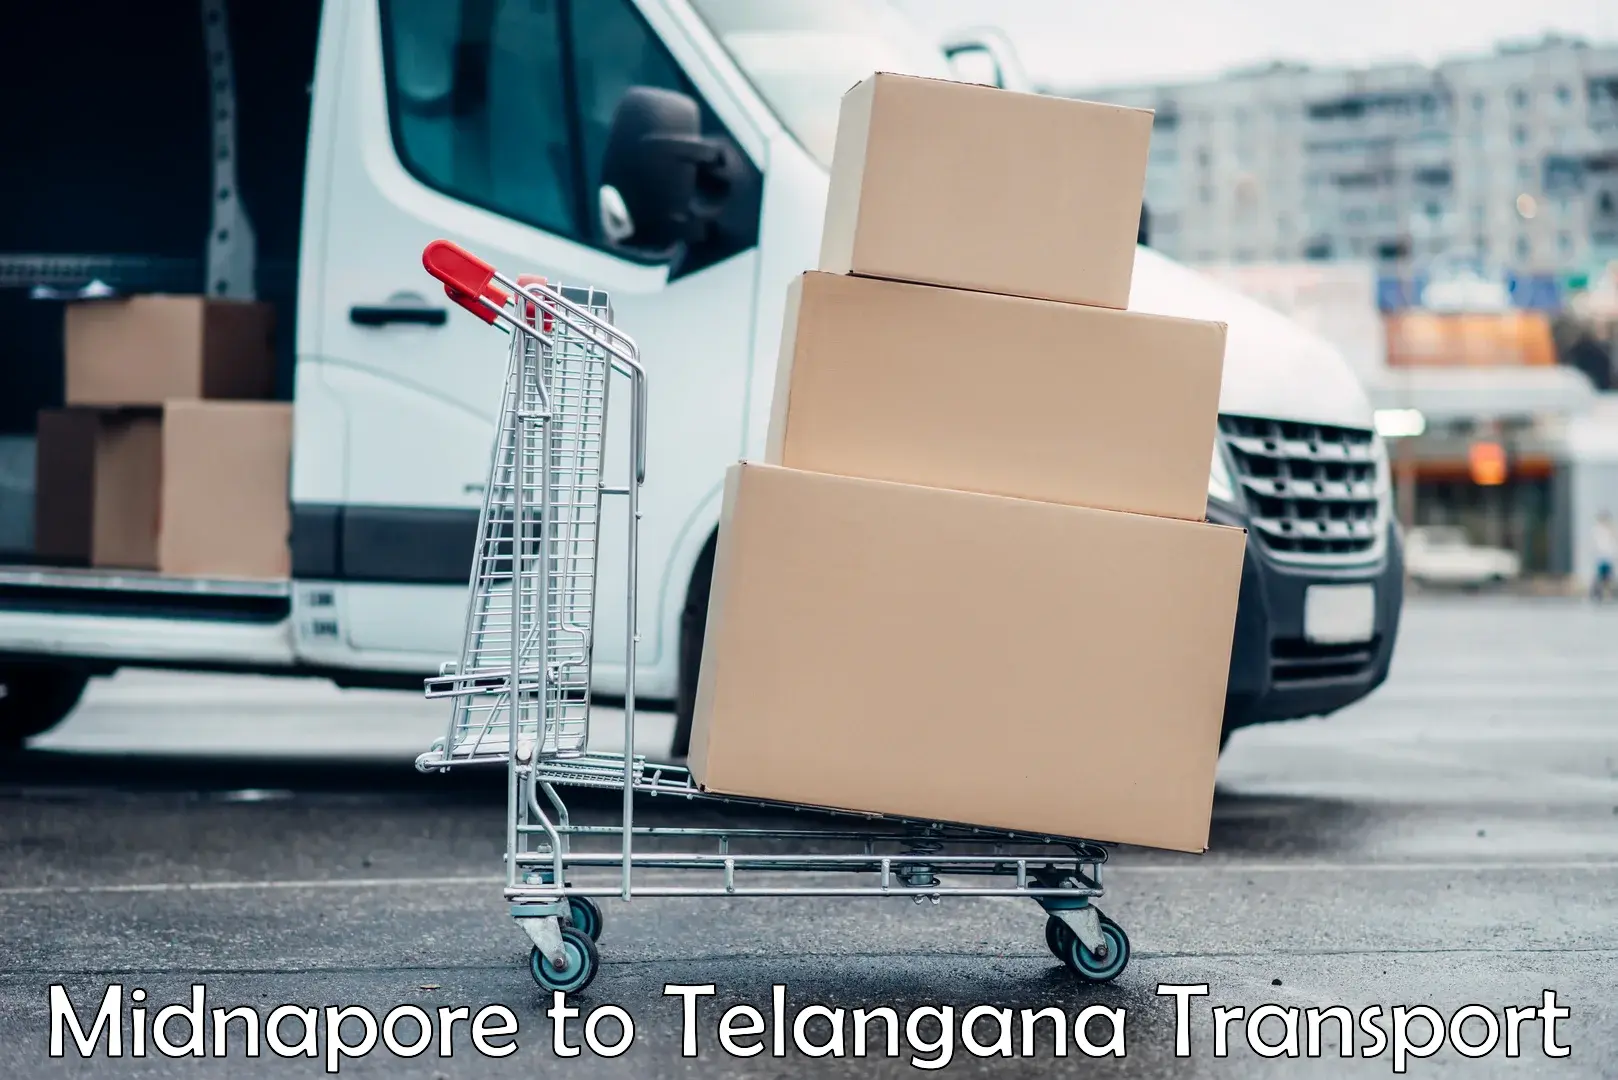 Road transport online services in Midnapore to Telangana